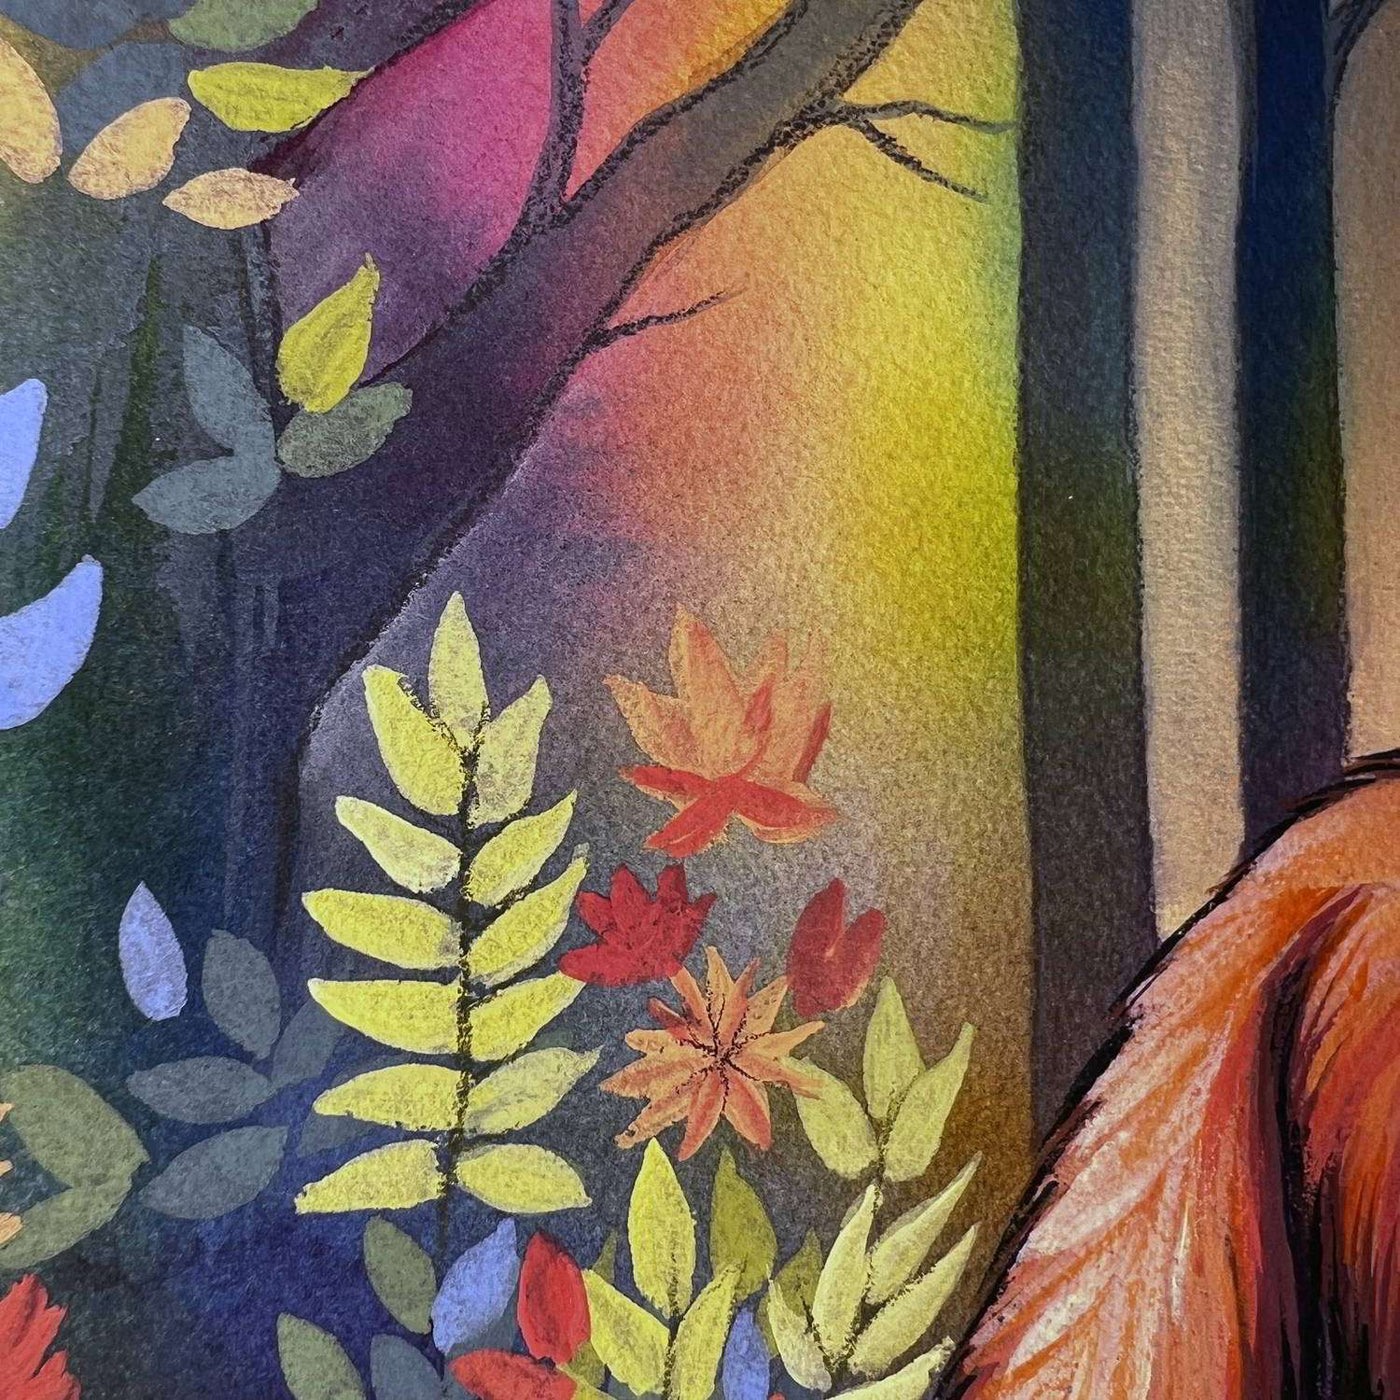 Detail of a fox painting showing the gradient twilight background and autumnal leaves.